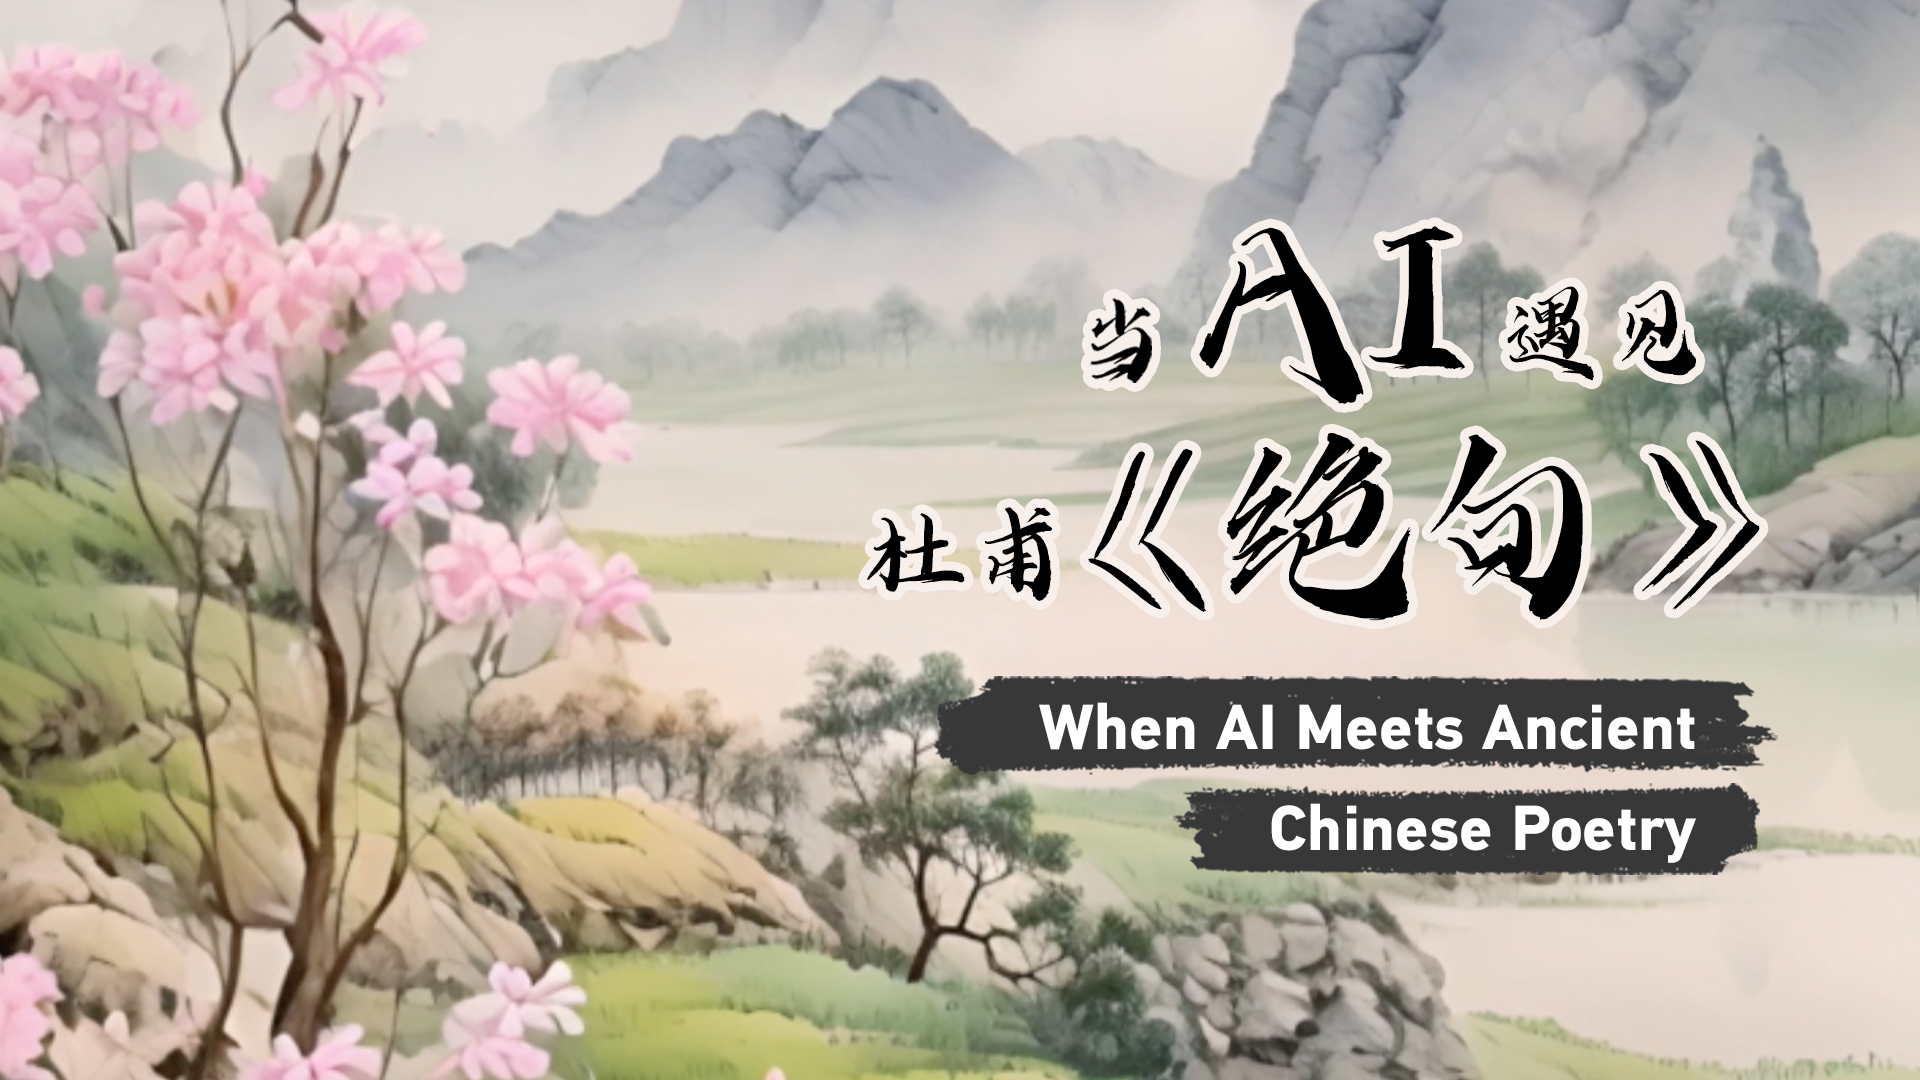 When AI meets ancient Chinese poetry: Entering Du Fu's realm